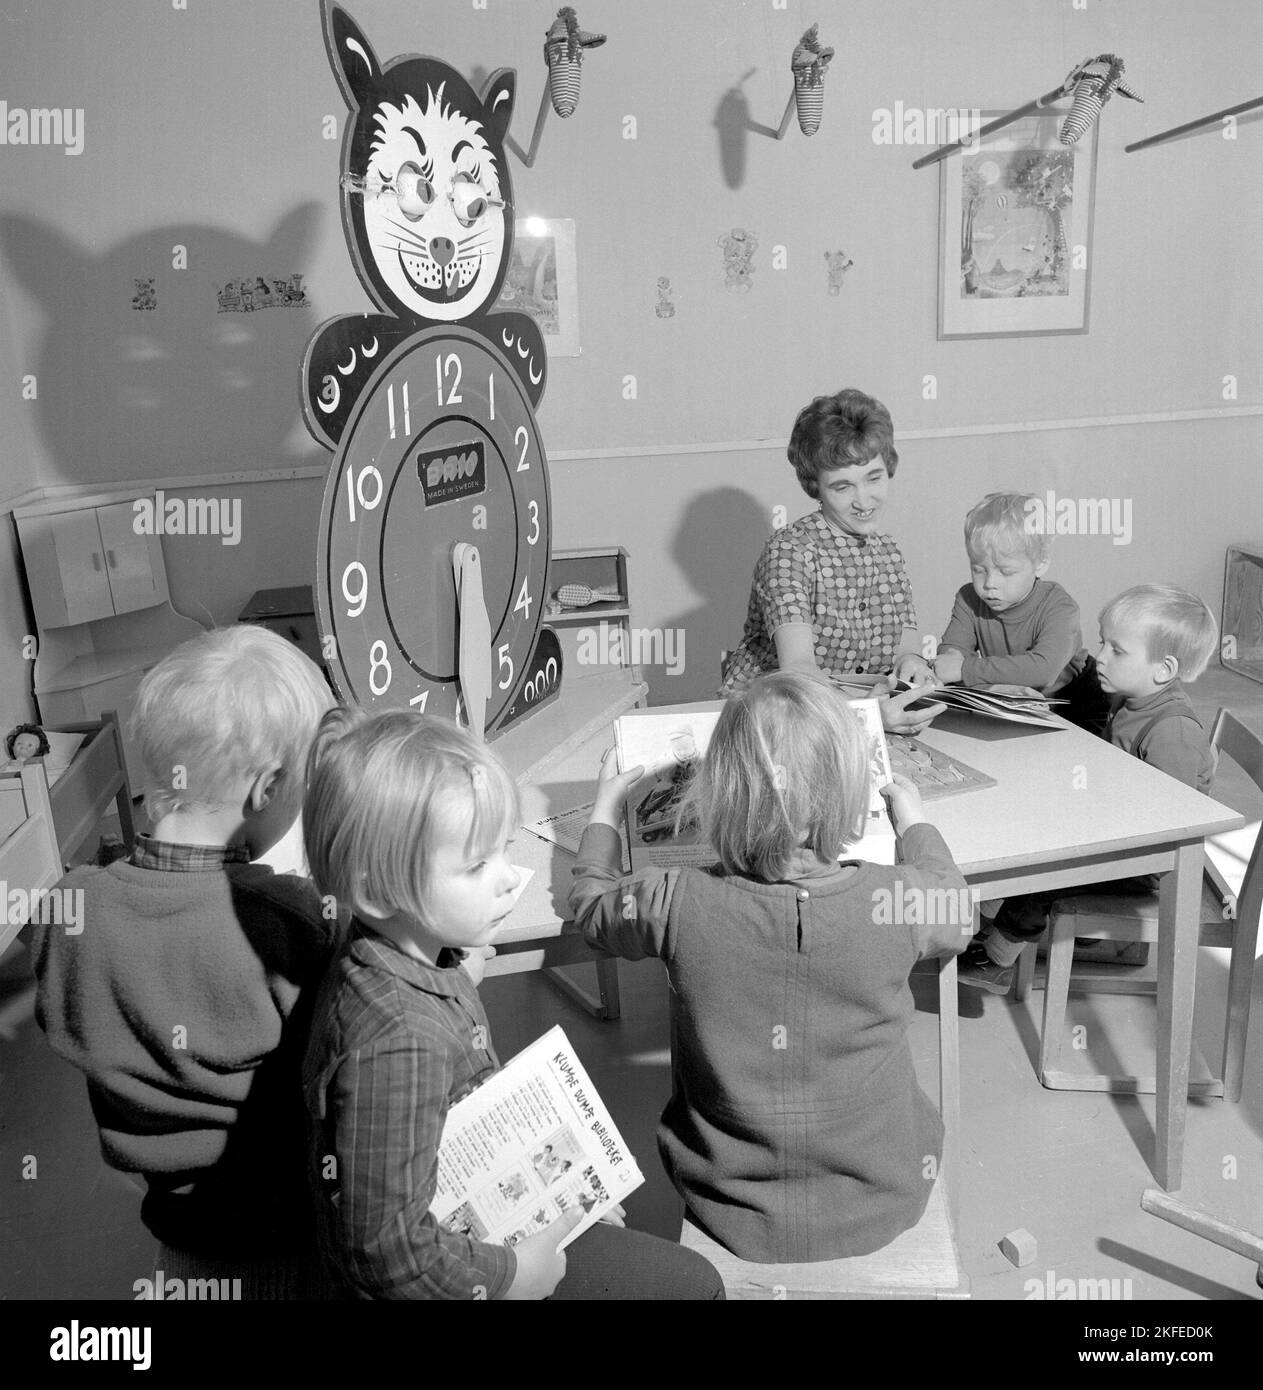 In the 1960s. The local Farsta Centrum shopping mall and area offers the parents shoppers a service of looking out for their children while doing the shopping. Pictured four children with a woman at a table reading and playing. A learning clock is visible, with extra large numbers for hours for the children to play and learn with.  Sweden 1967. Conard ref 5427 Stock Photo